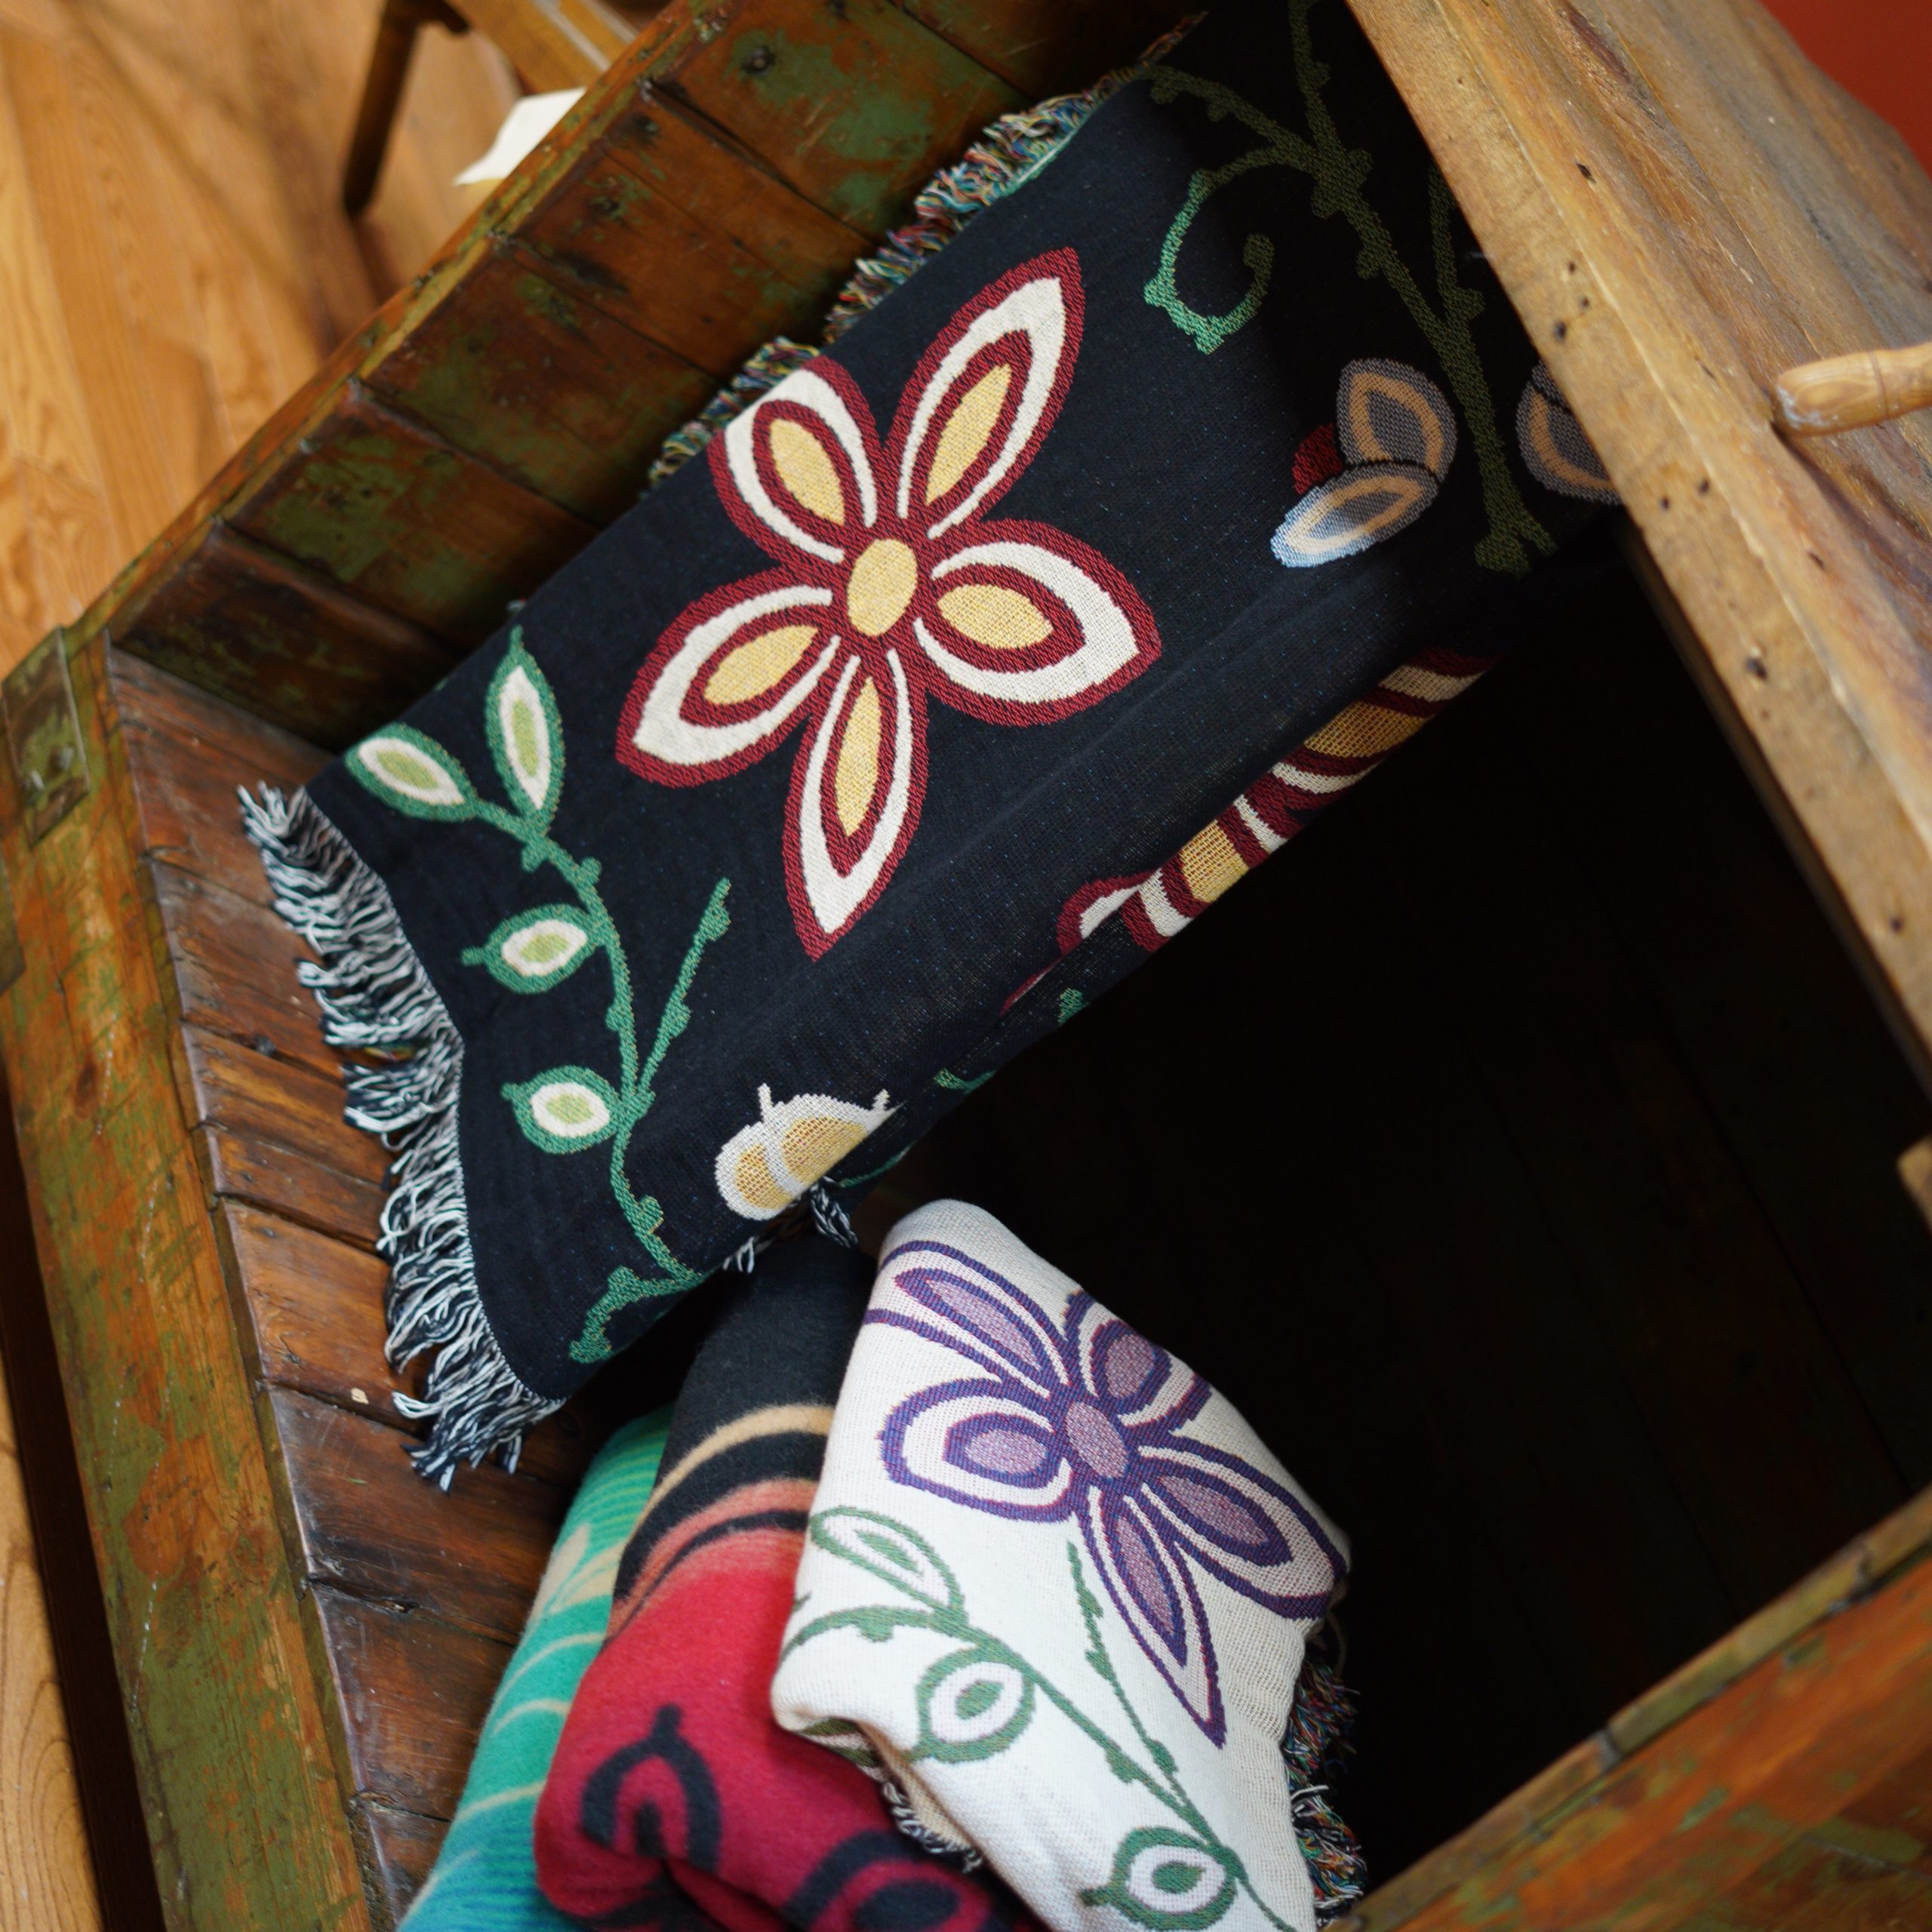 A photograph of colorful blankets in a wooden box